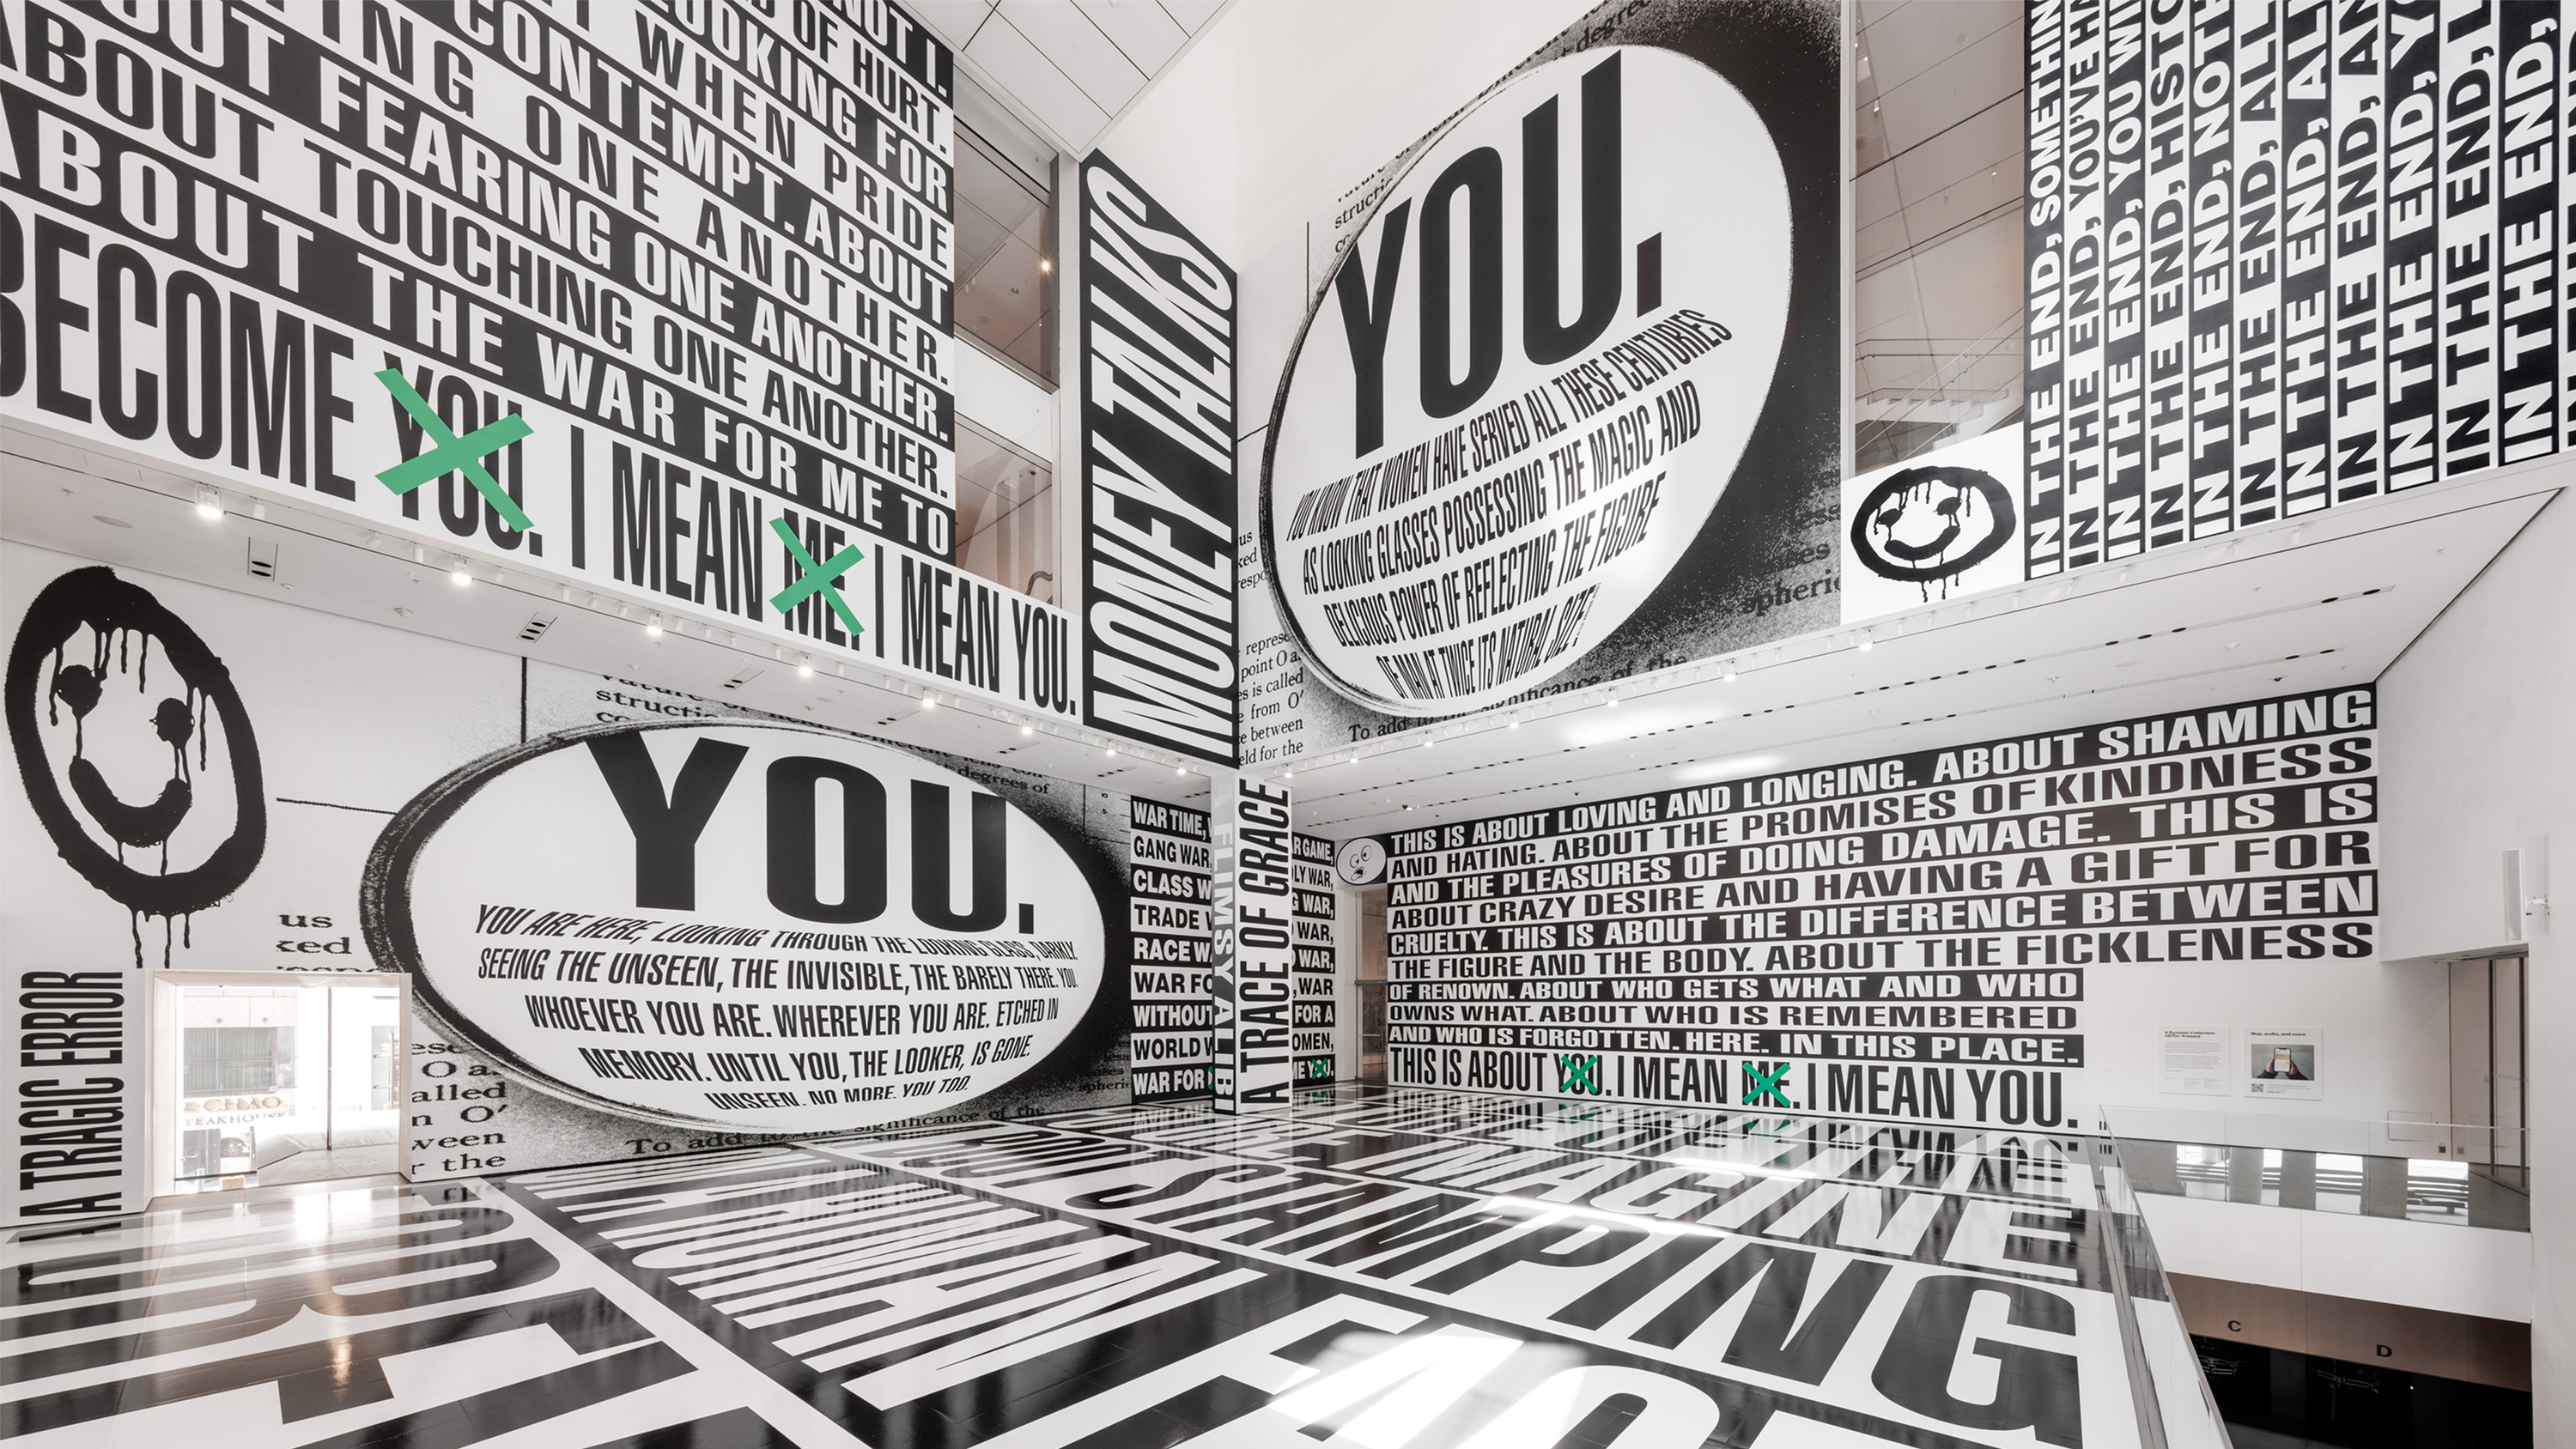 An installation view of Barbara Kruger's large-scale site-specific commission at The Museum of Modern Art, from 2022 through 2023